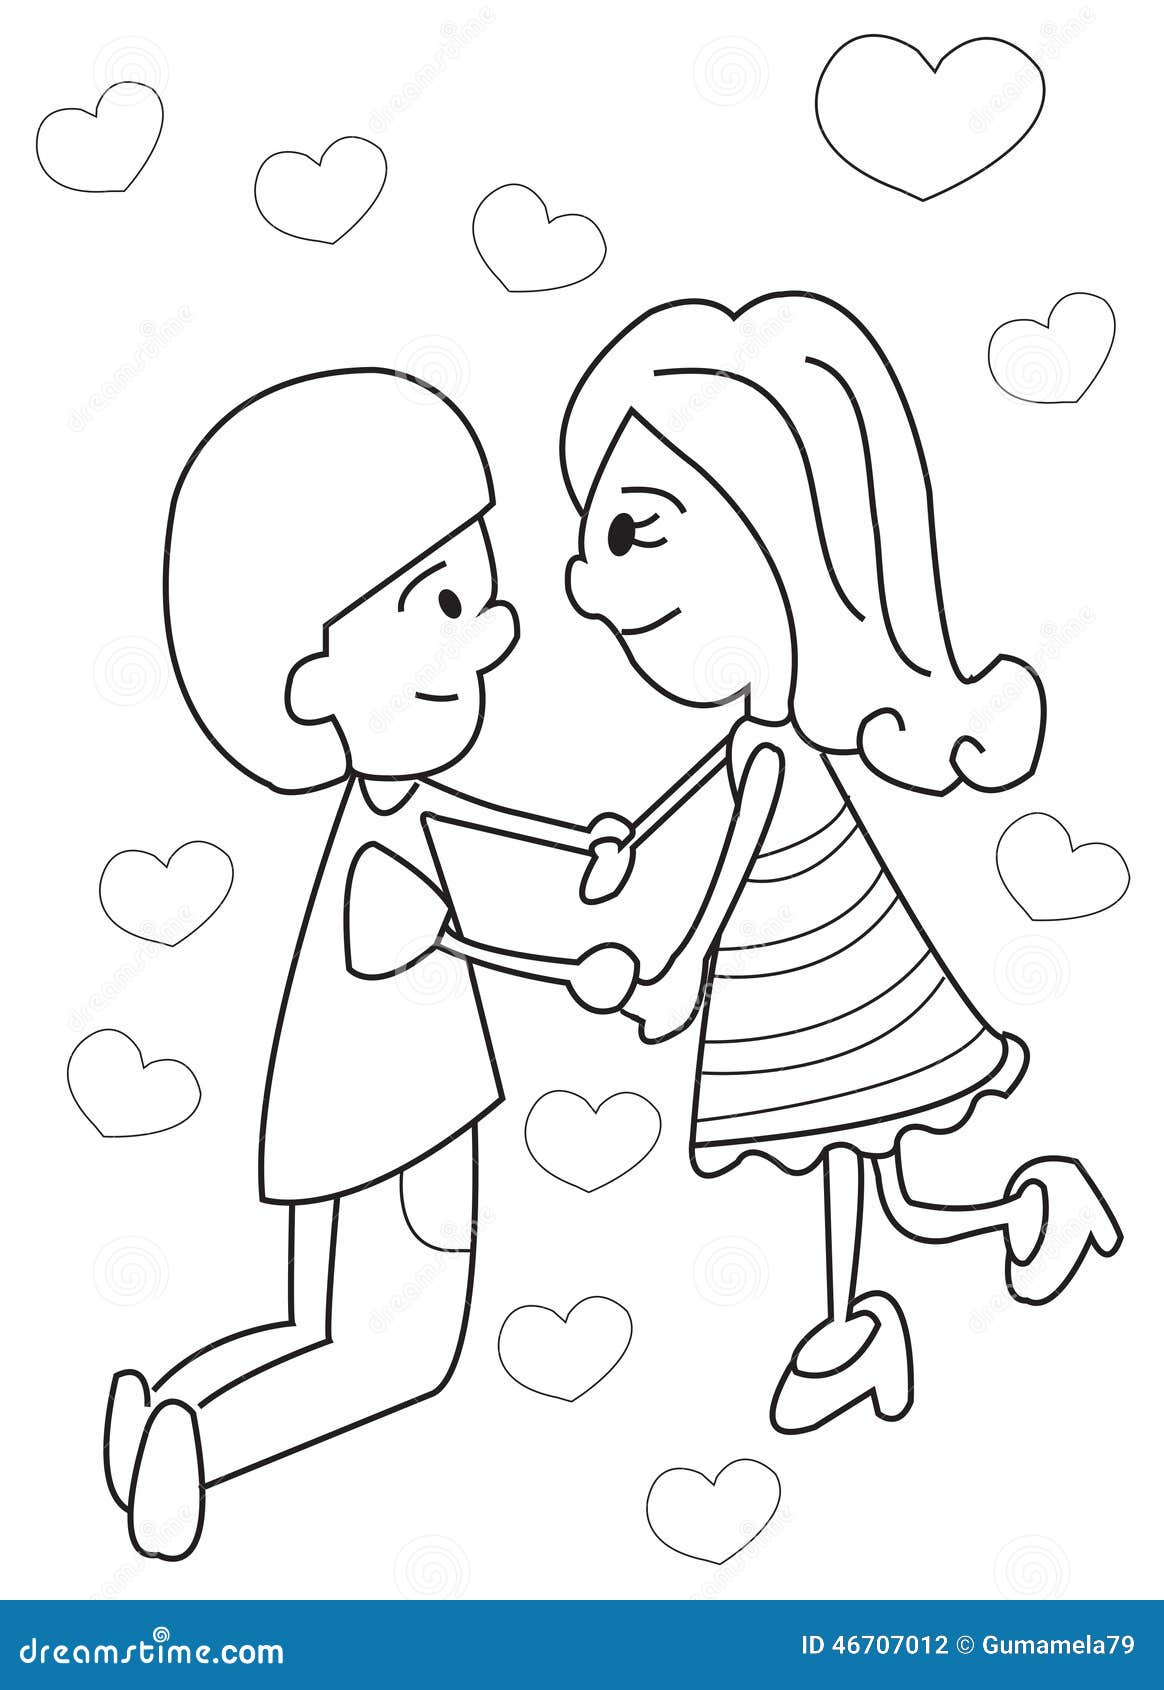 Hand Drawn Coloring Page Of A Boy And Girl Holding Hands Stock Illustration Illustration Of Coloring Card